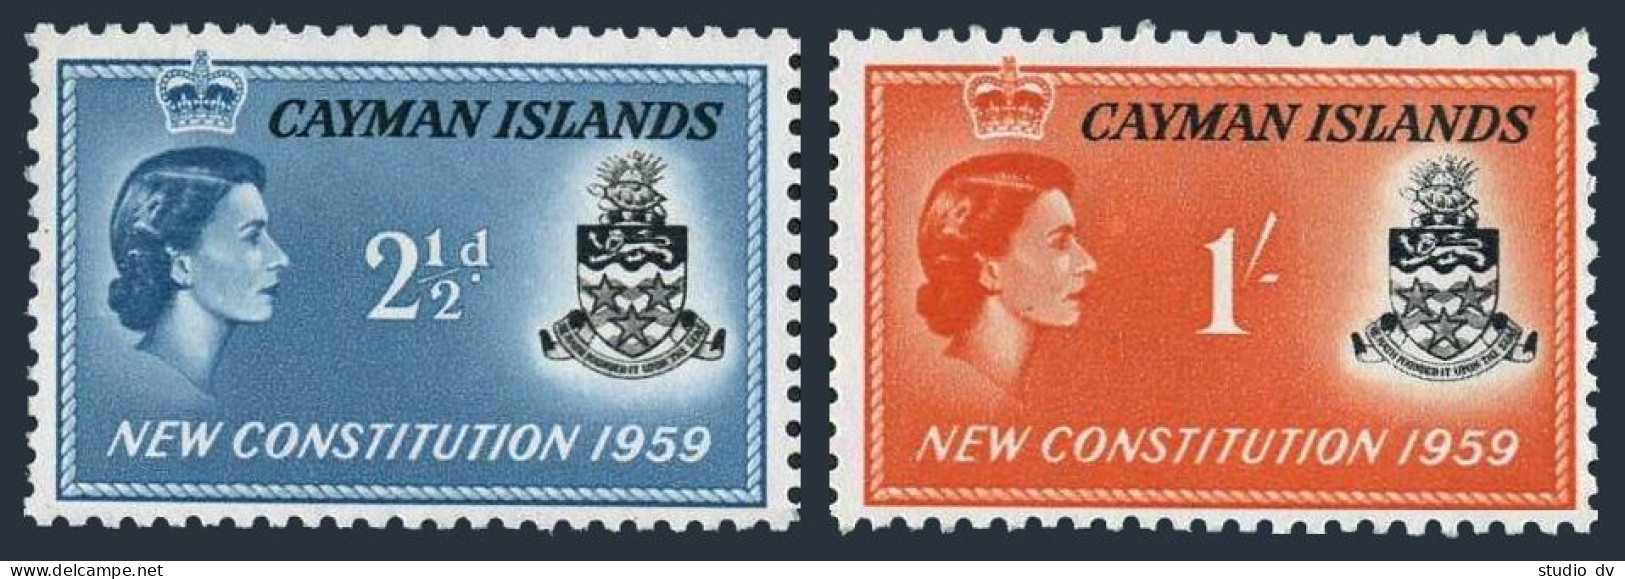 Cayman 151-152, MNH. Michel 152-153. New Constitution 1959. QE II, Arms. - Kaimaninseln